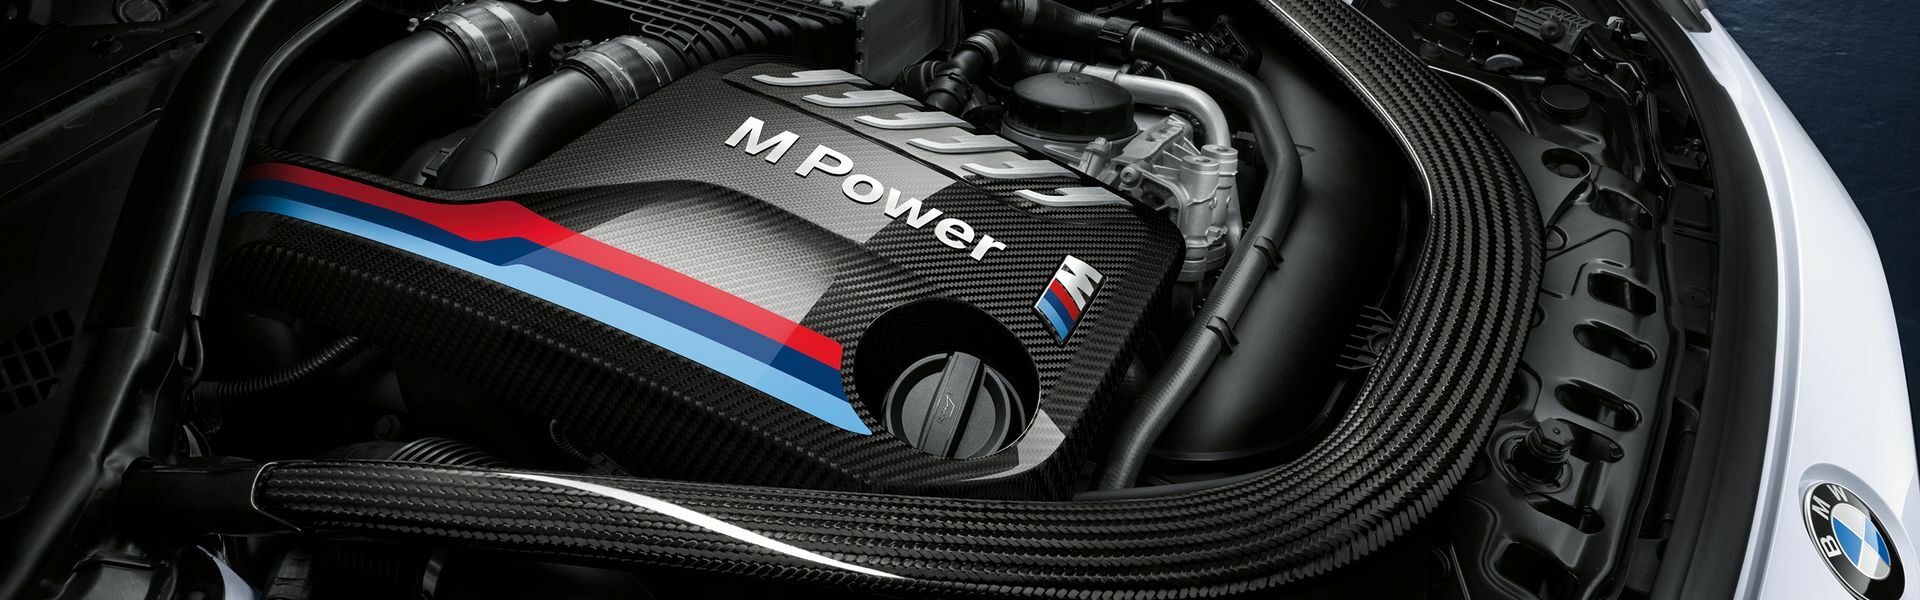 Performance enhancements/ Software modifications/ Small performance parts for BMW M5 E60, E61